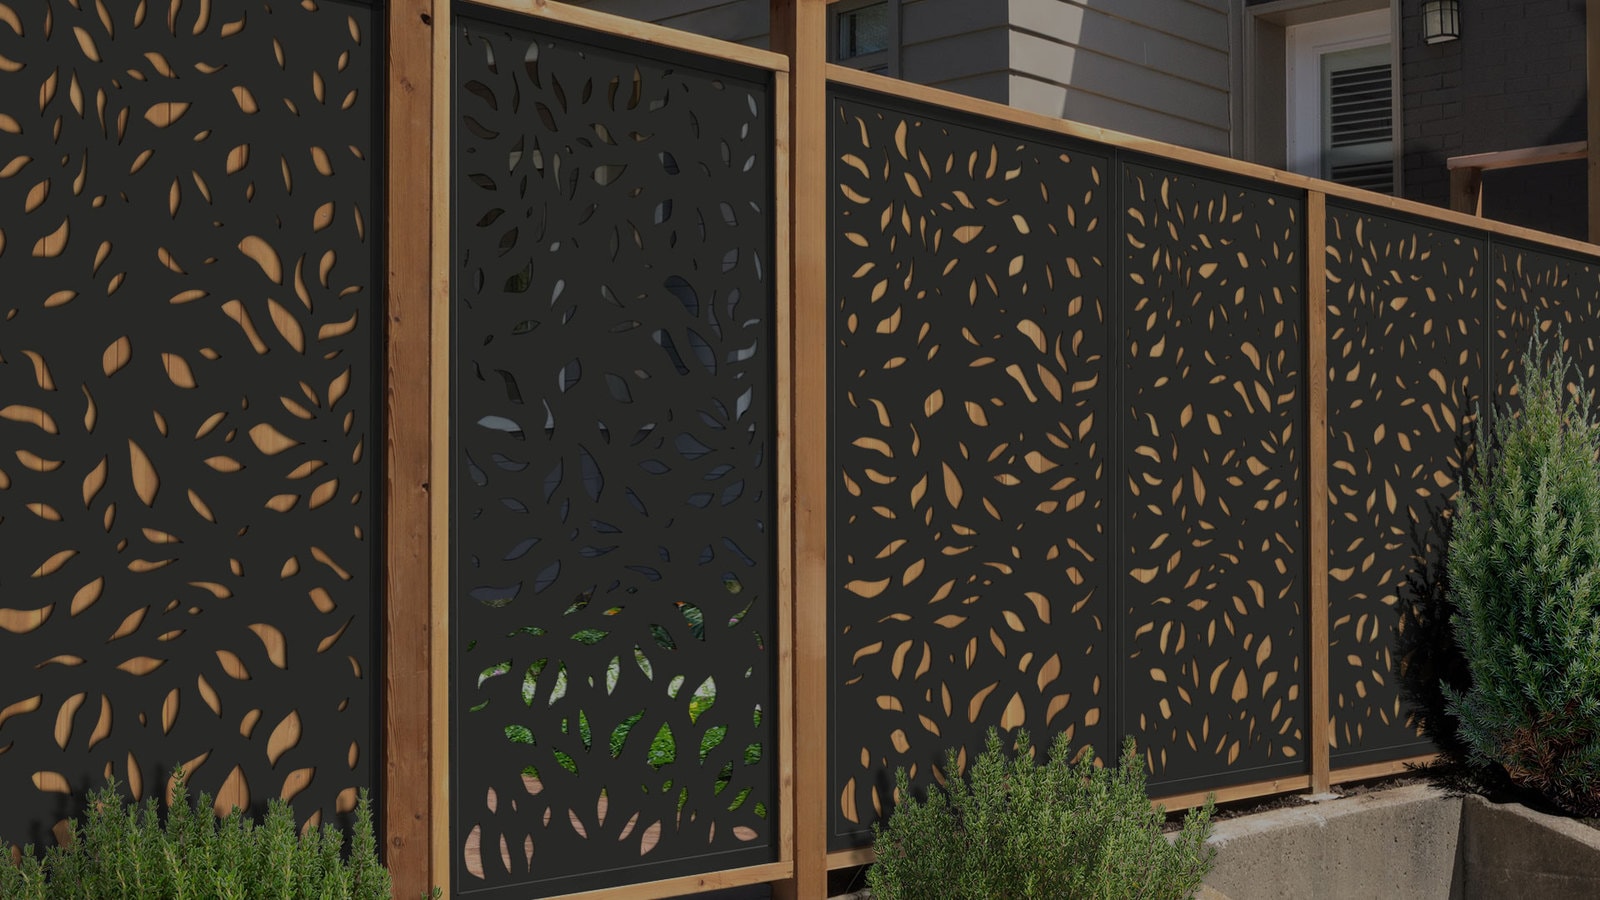 Home Modinex Panels, Outdoor Decorative Wall Panels Canada